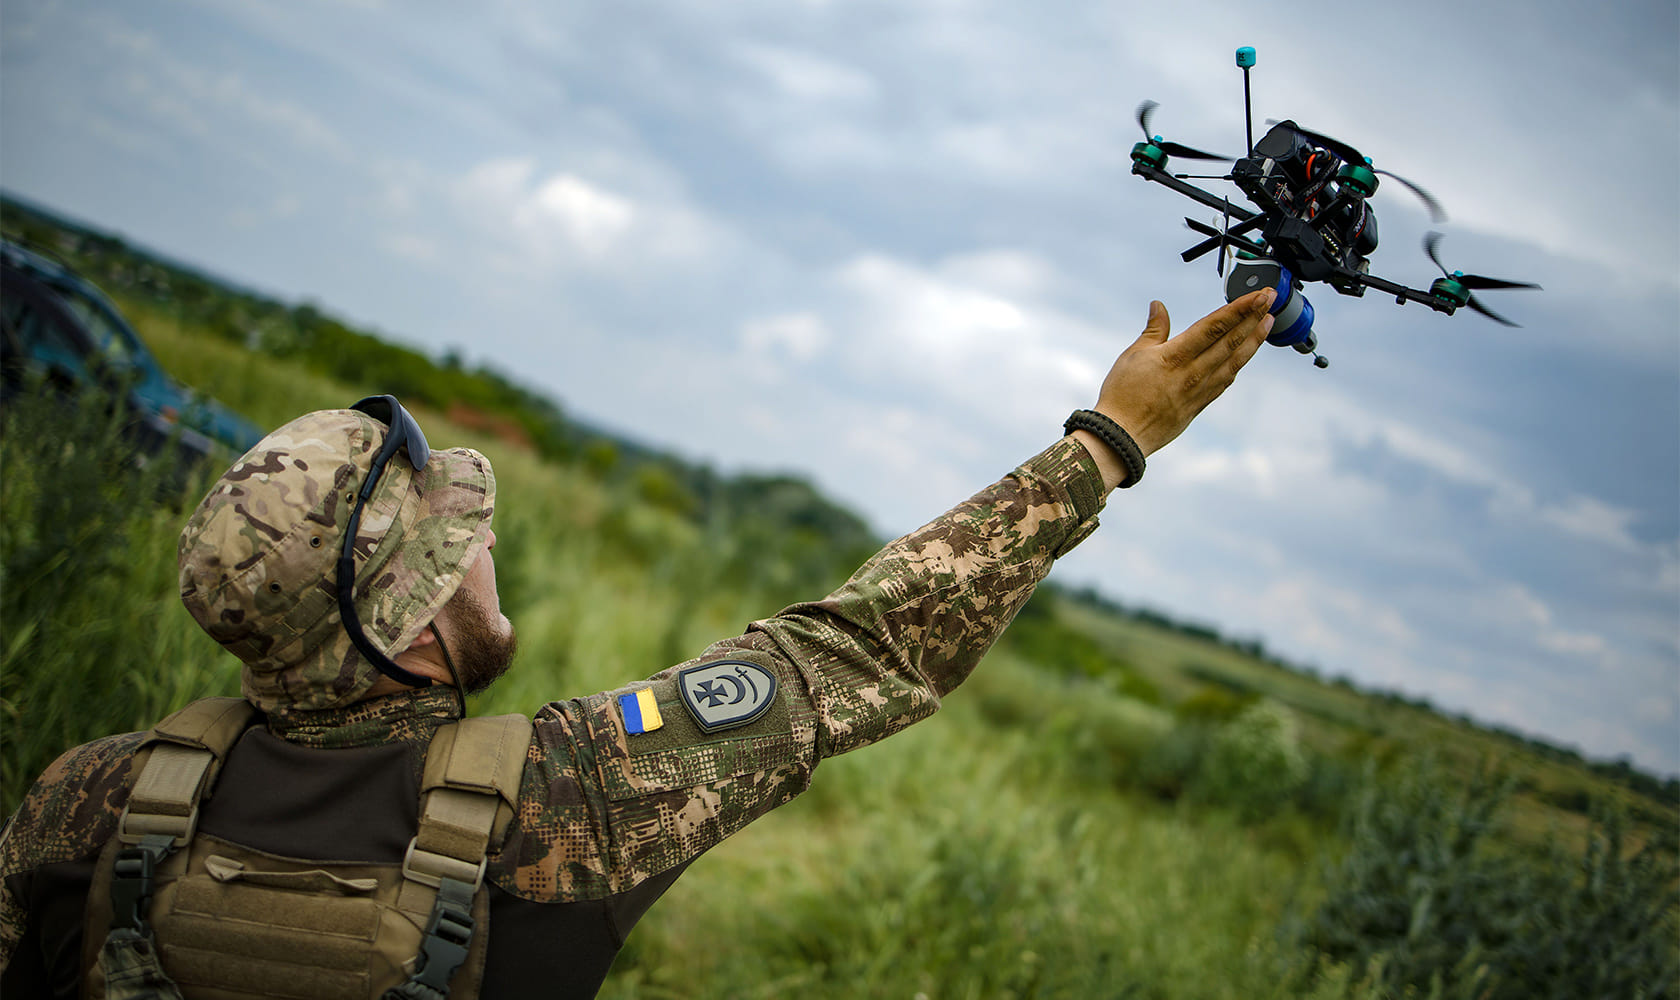 Oleksandr Kamishin: In Ukraine, there are over 50 manufacturers of ammunition for drones